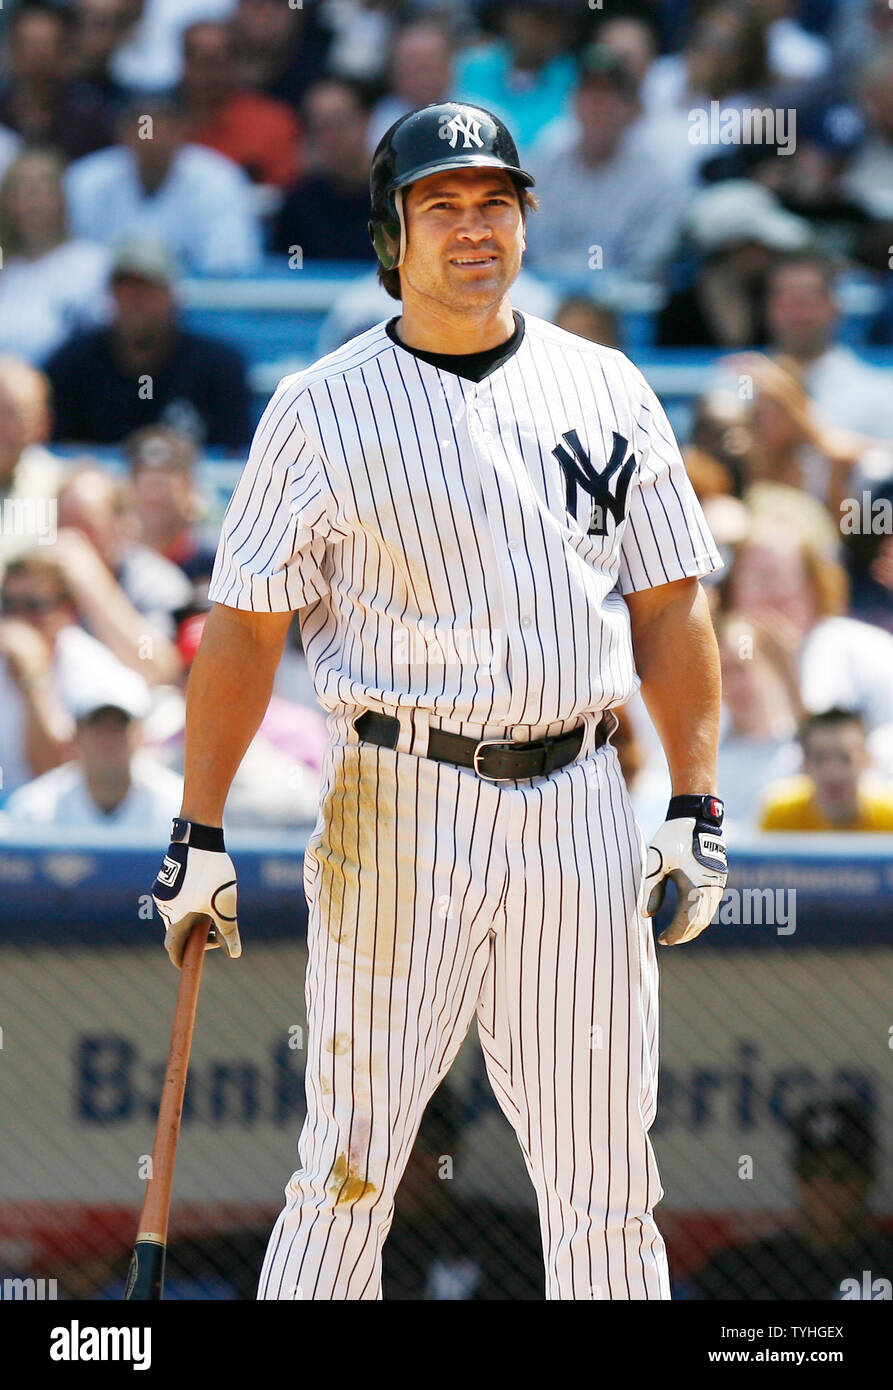 New York Yankees Johnny Damon reacts after a called strike in the bottom of  the 6th inning at Yankees Stadium in New York City on May 17, 2006. The New  York Yankees